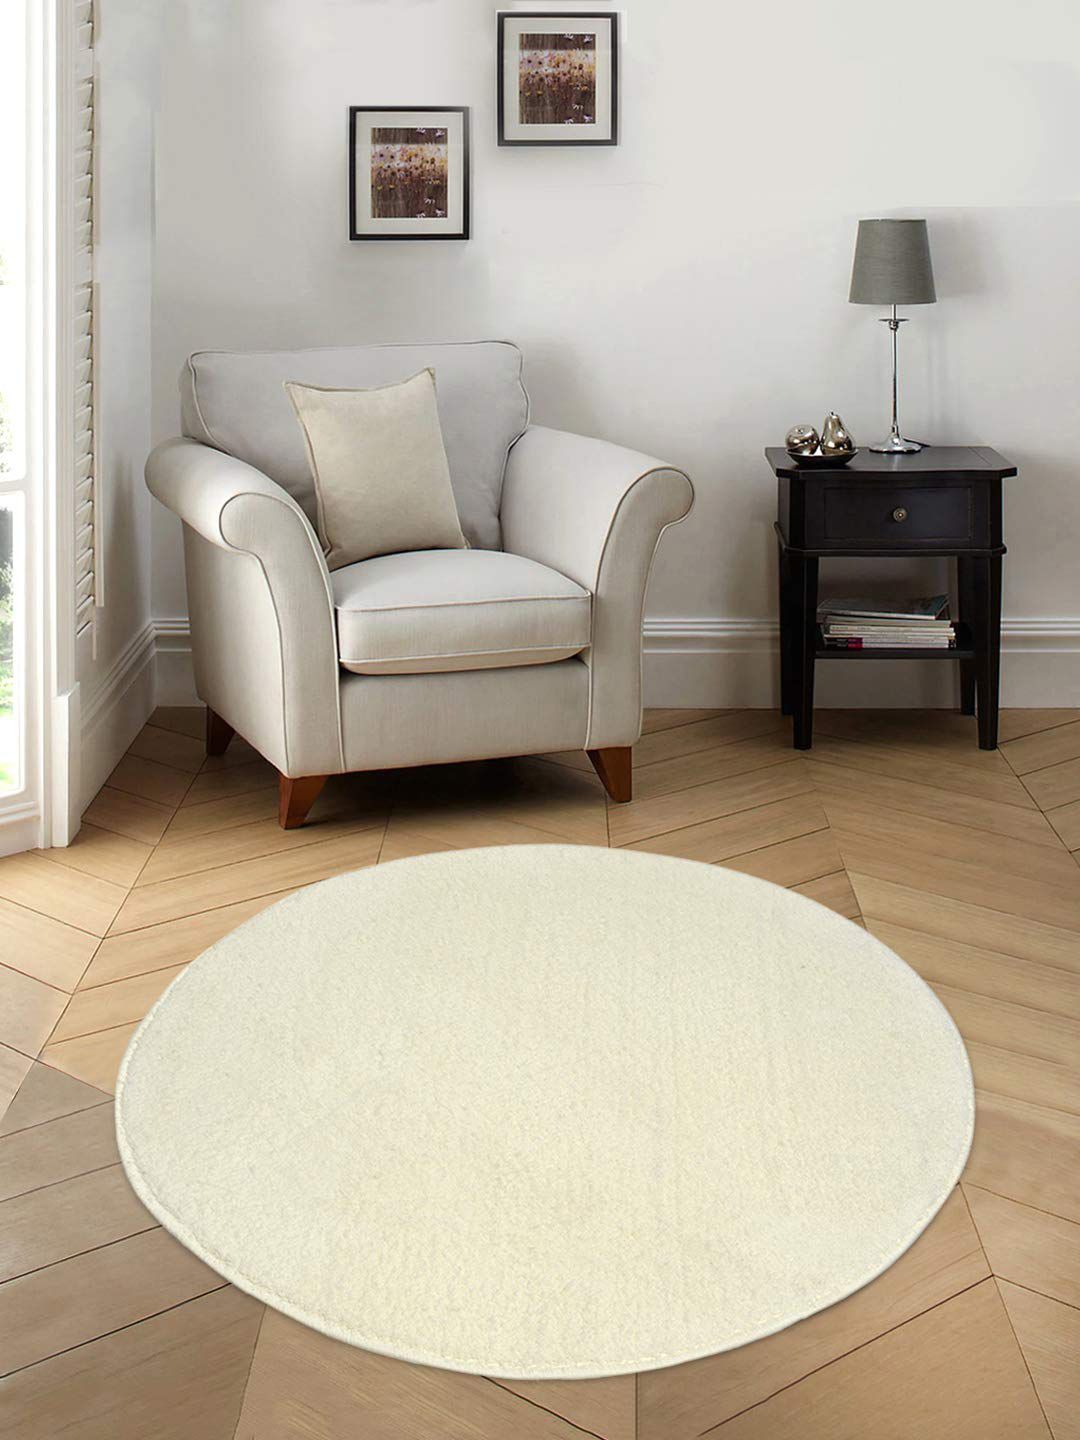 Saral Home Off-White Solid Cotton Shaggy Yarn Anti-Skid Round Floor Mat Price in India